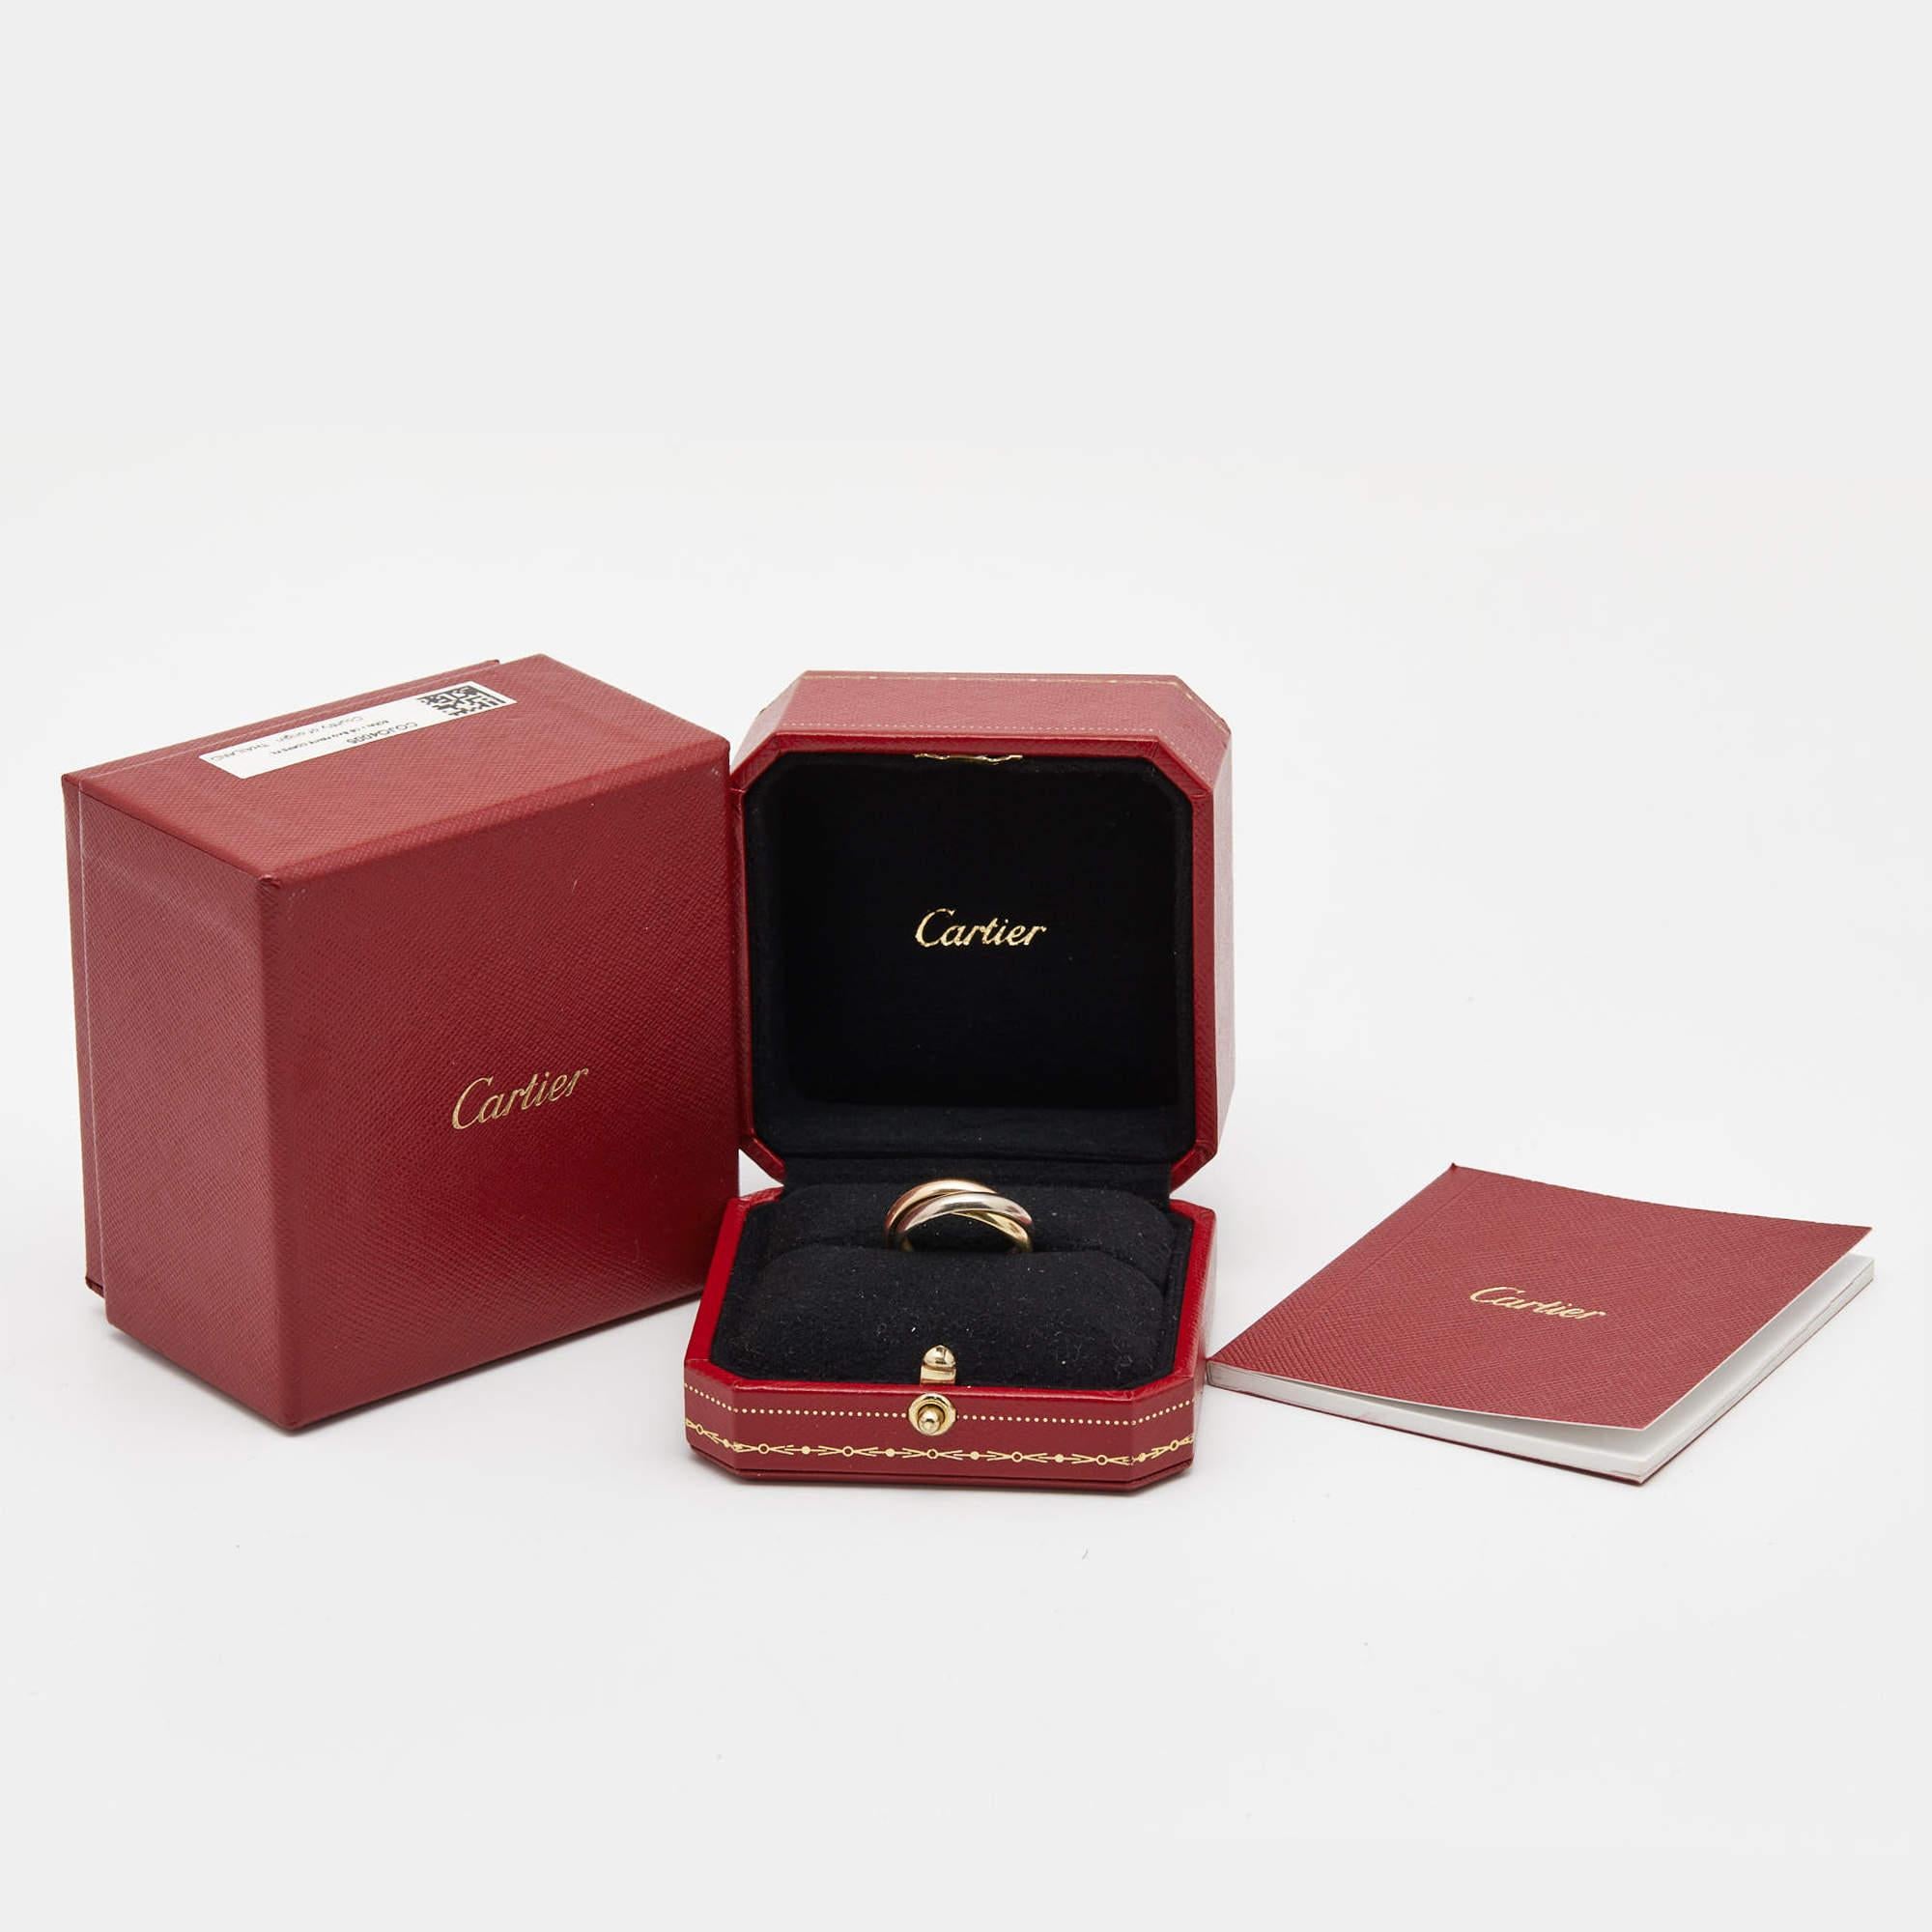 You will love wearing this Cartier Trinity Classic 18k gold ring. It is a masterfully crafted piece of jewelry that embodies timeless luxury and sophisticated elegance.

